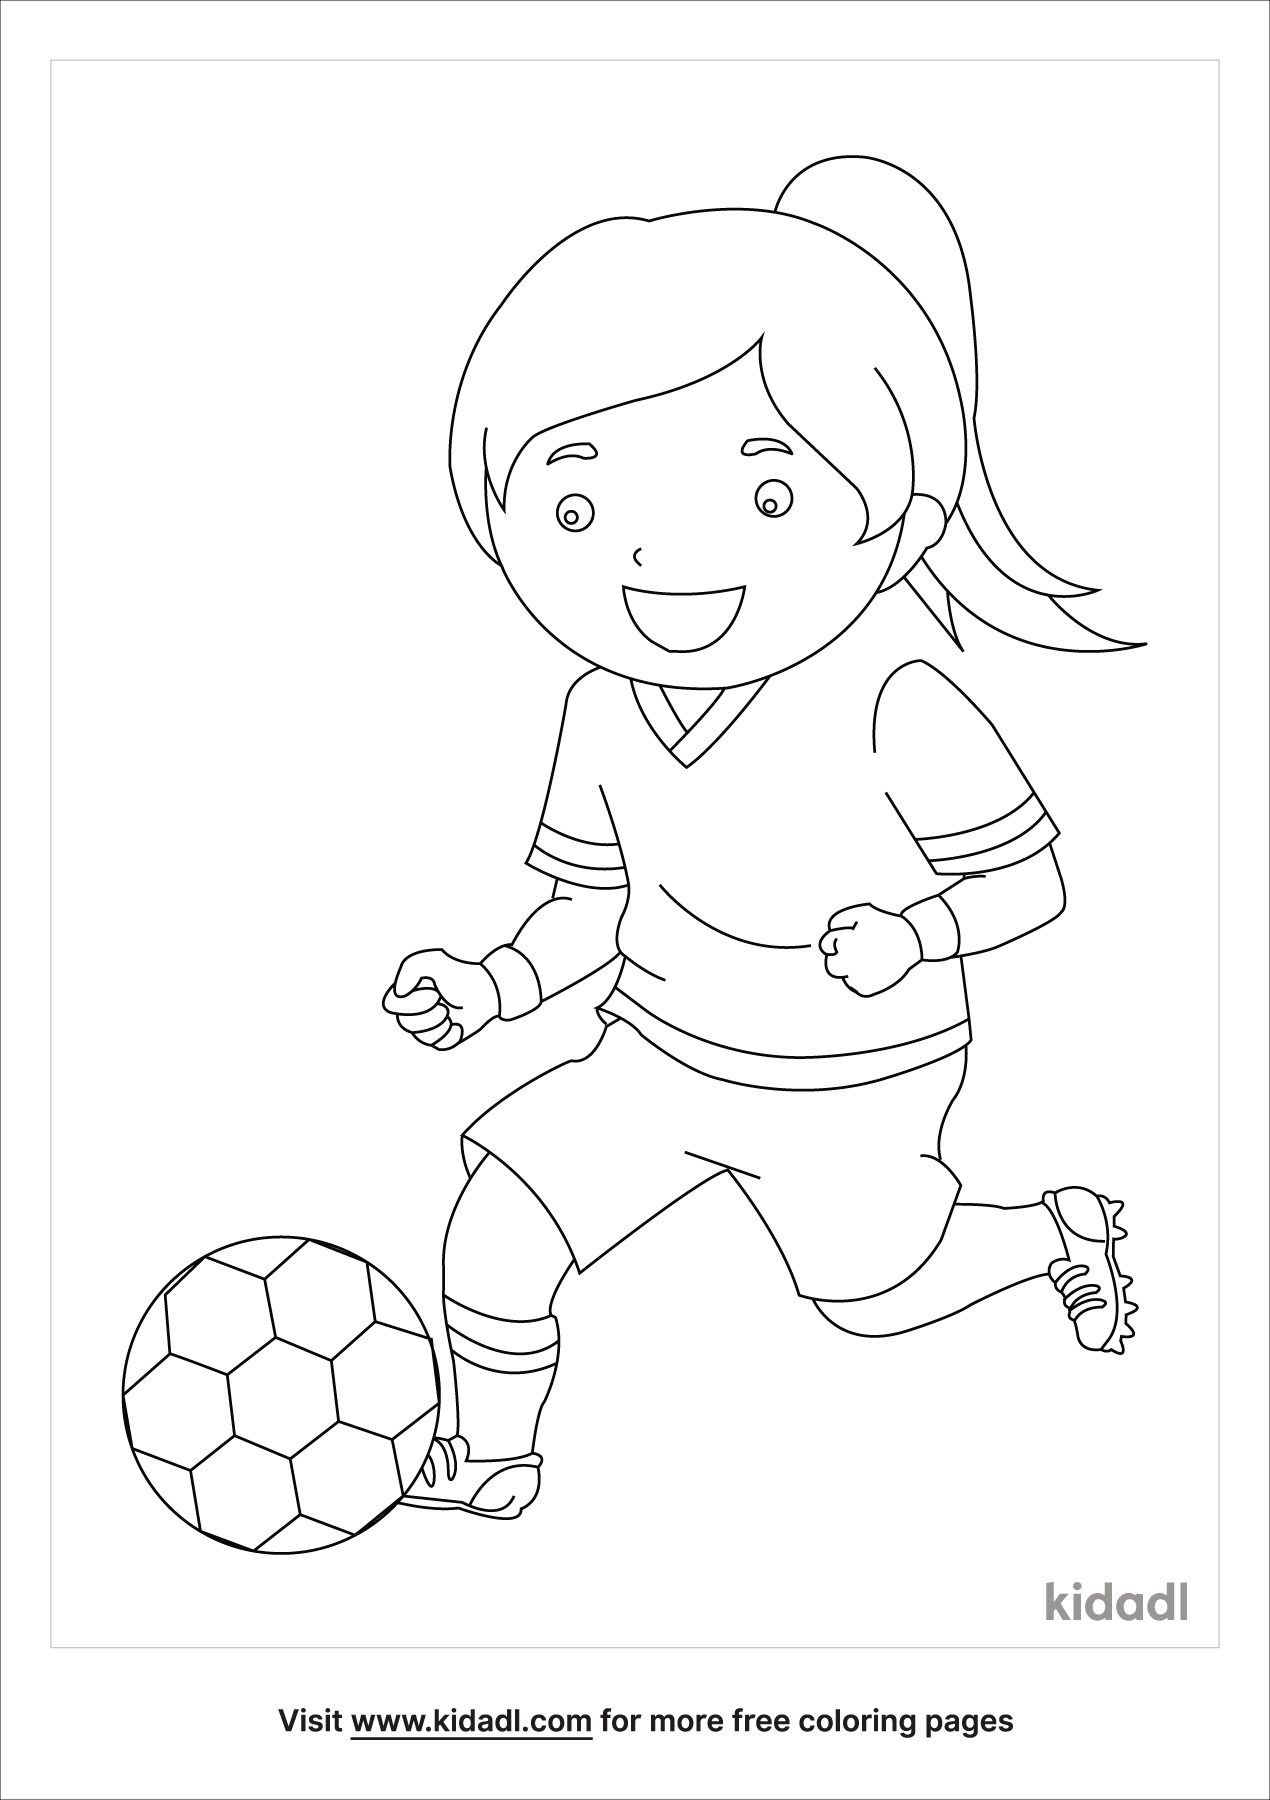 Female Soccer Player Coloring Pages | Free Sports Coloring Pages | Kidadl